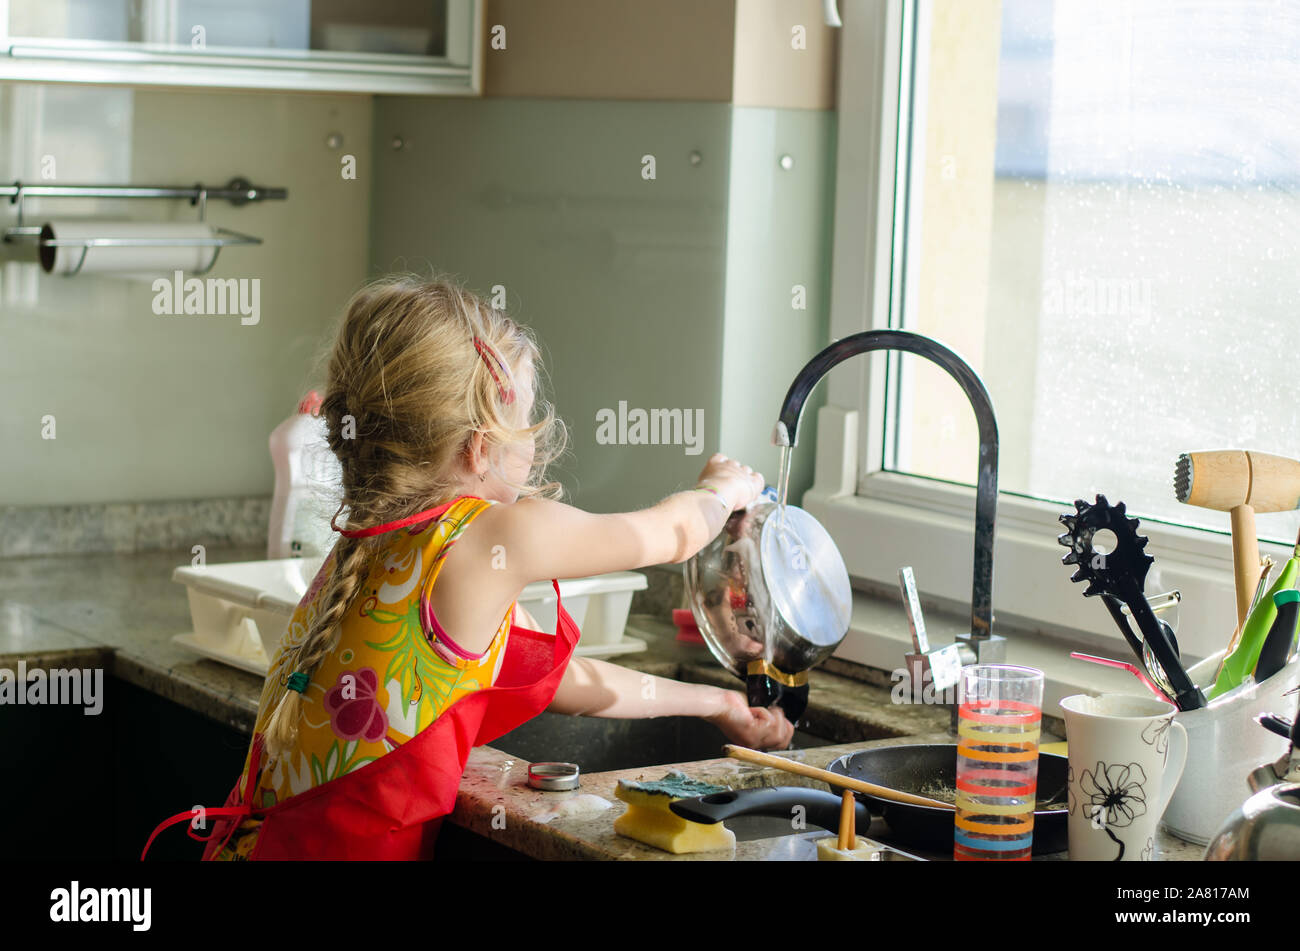 https://c8.alamy.com/comp/2A817AM/little-child-washing-dishes-in-the-kitchen-2A817AM.jpg